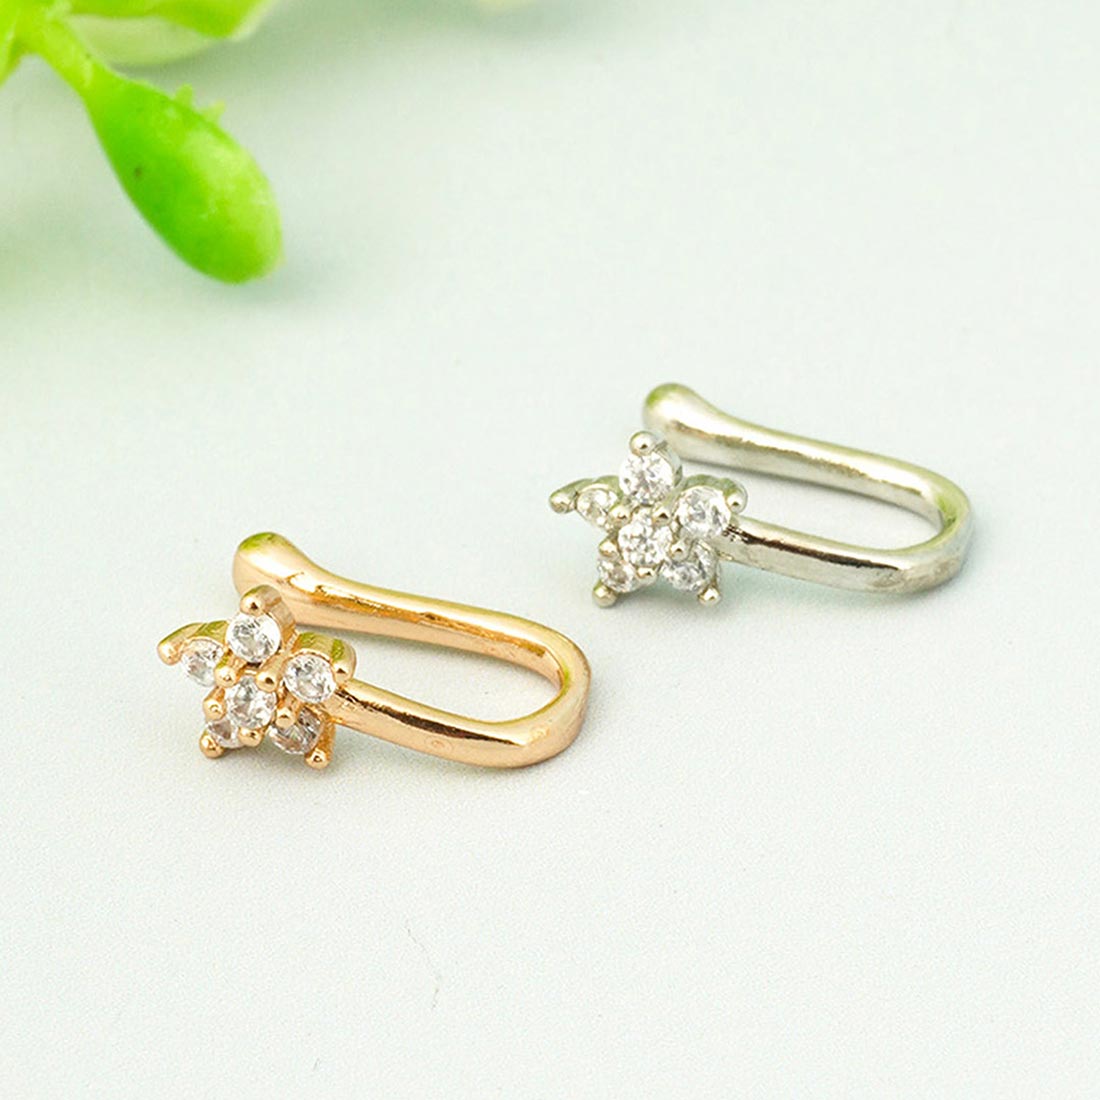 Women Set of 2 Gold & Silver-Toned Stone-Studded Nosepin